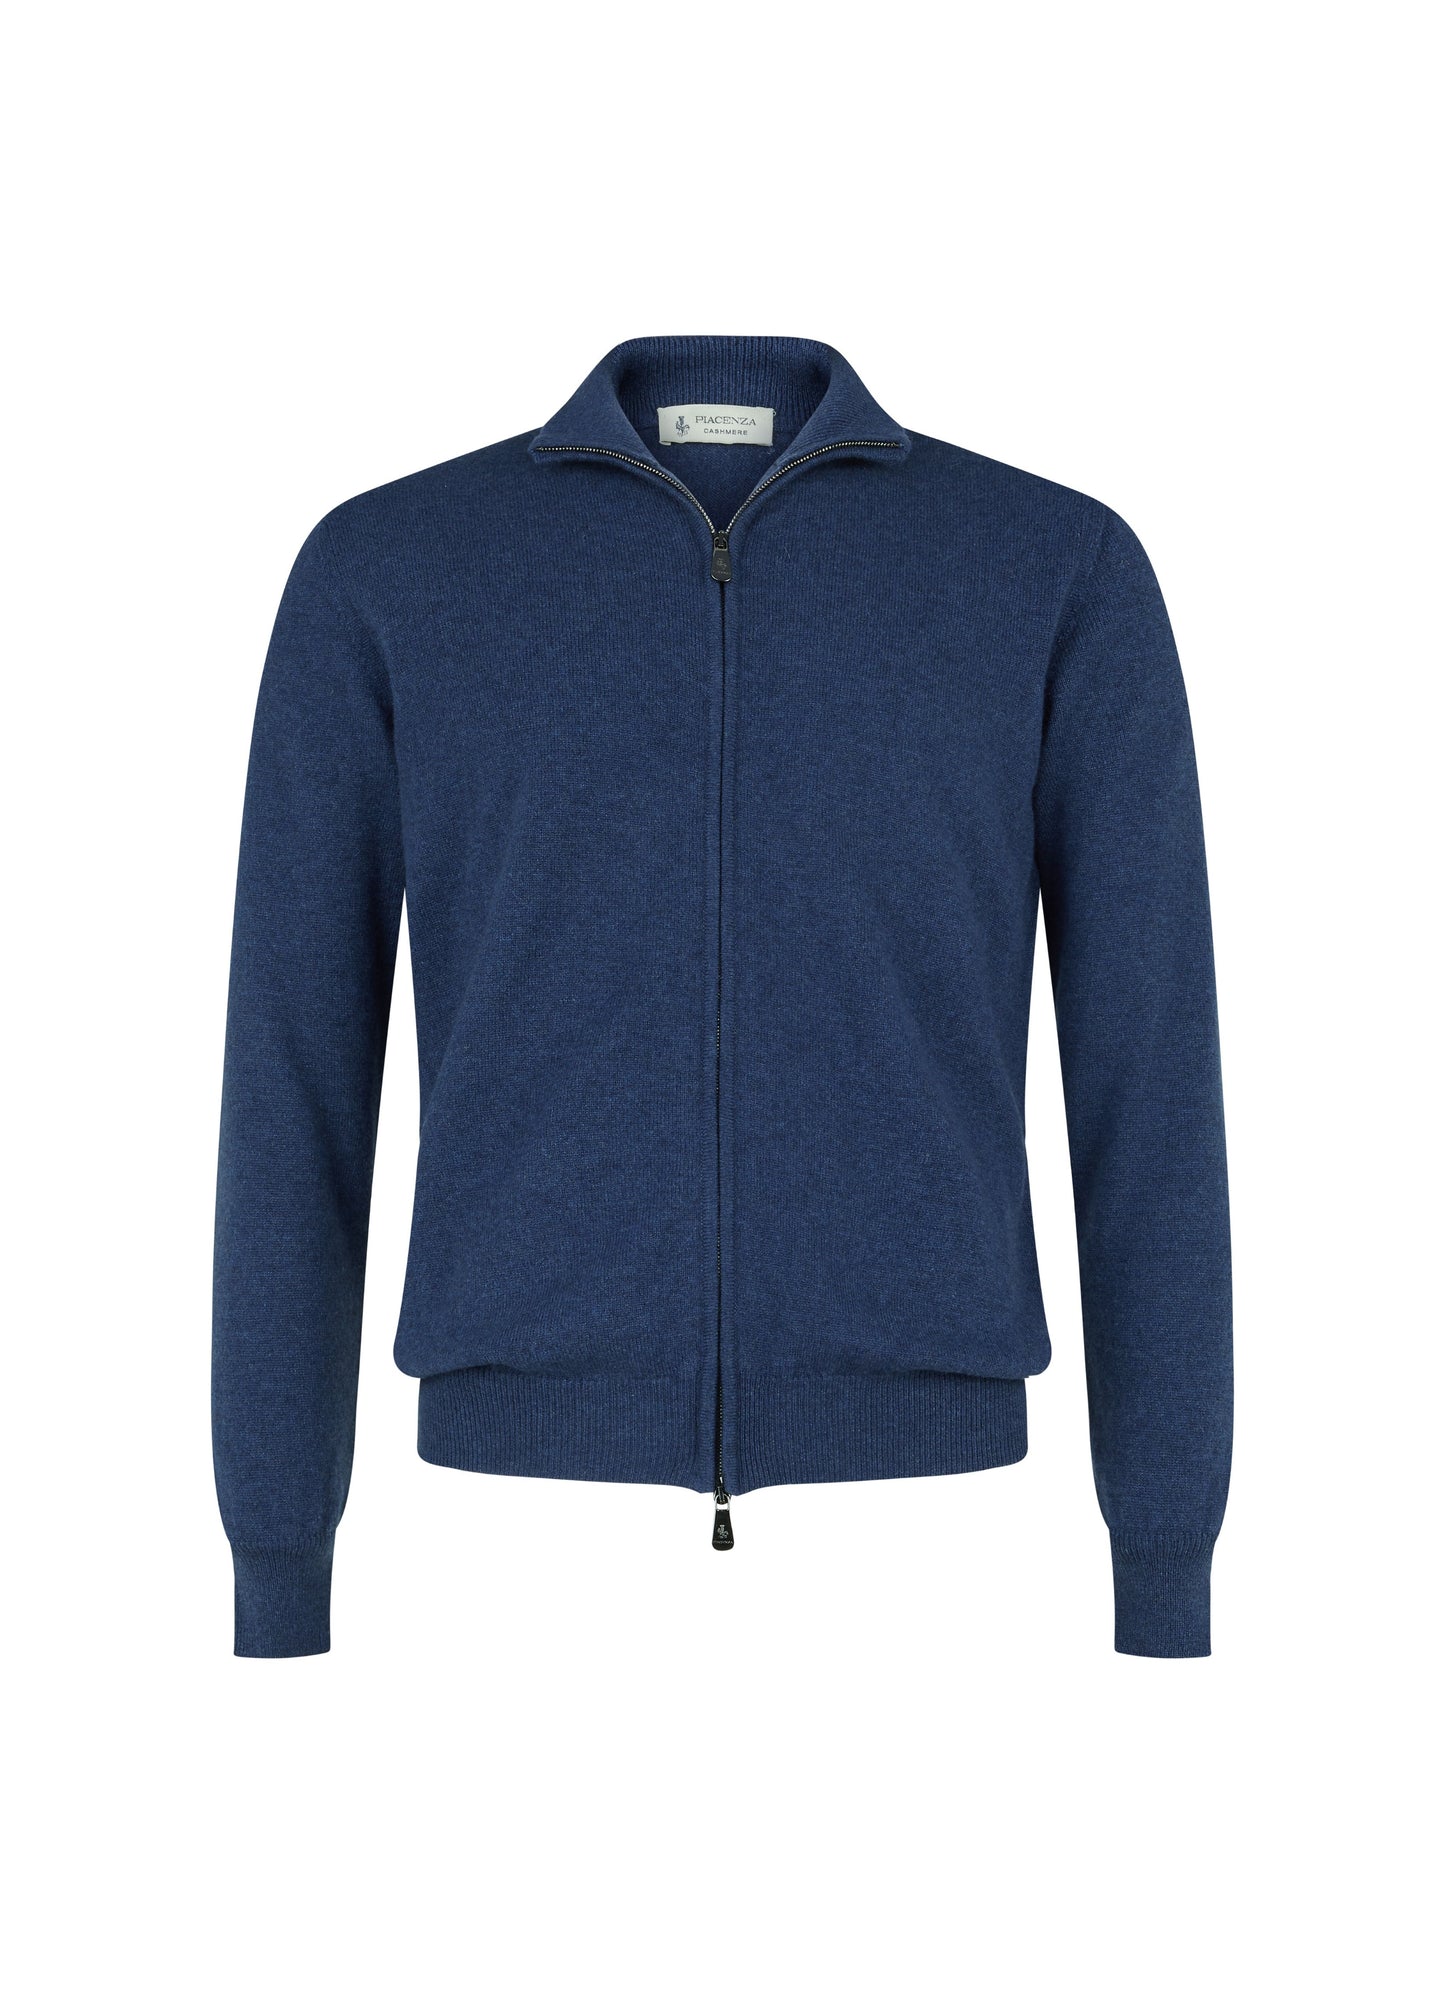 Cardigan with Blue Zip in pure cashmere